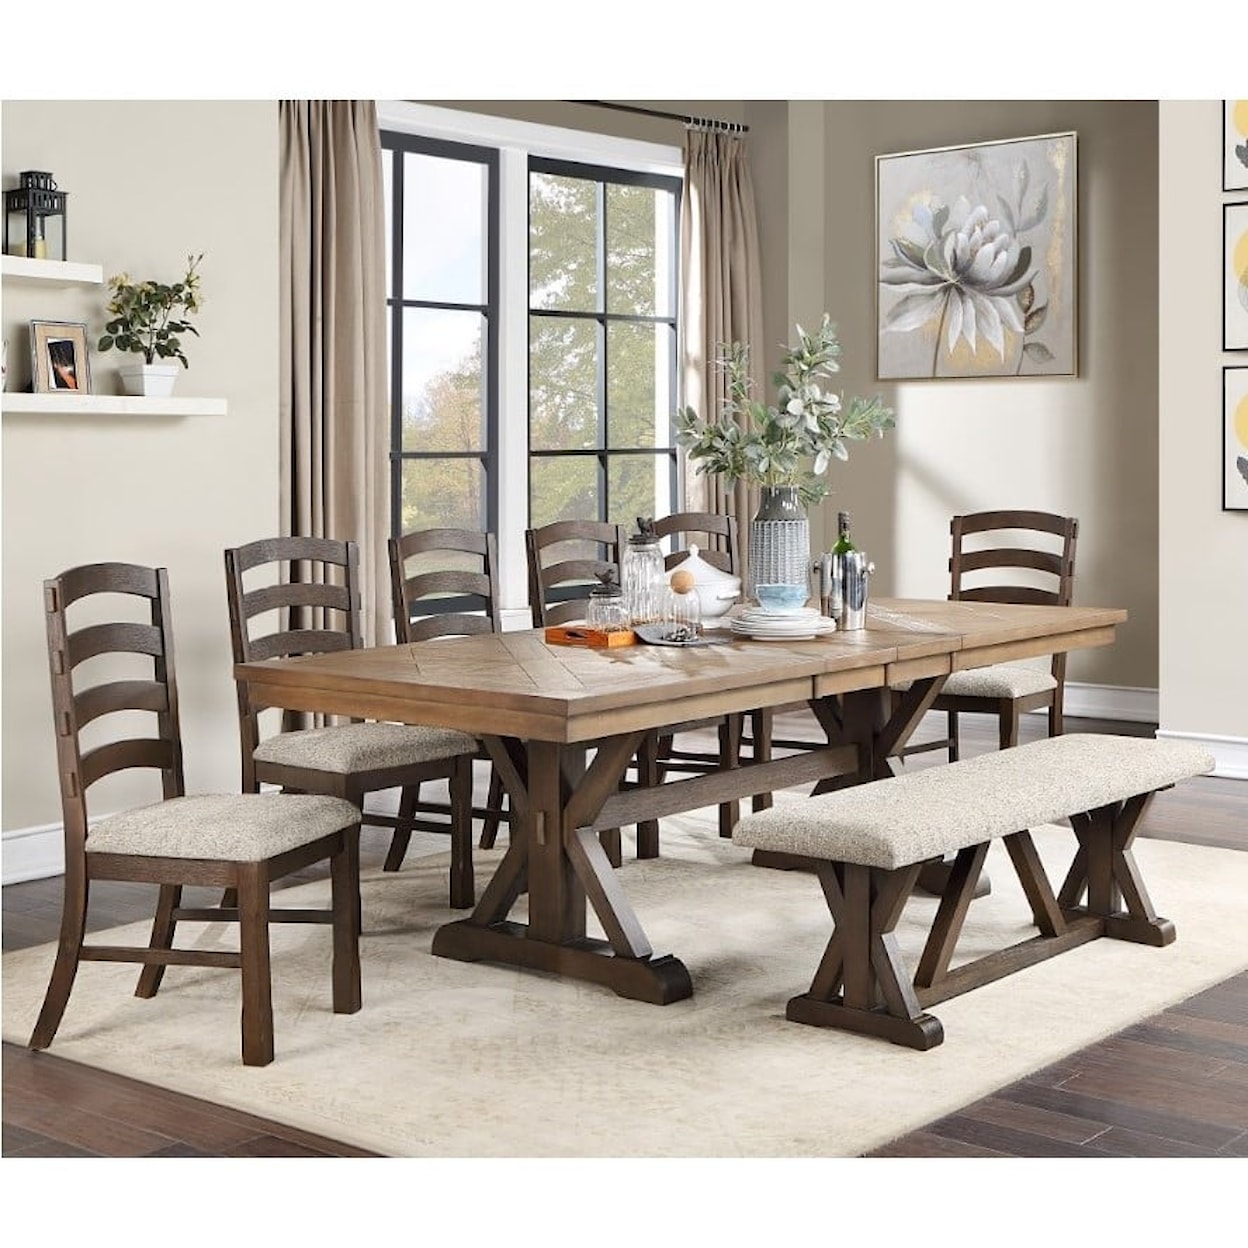 Acme Furniture Pascaline Dining Table - Top